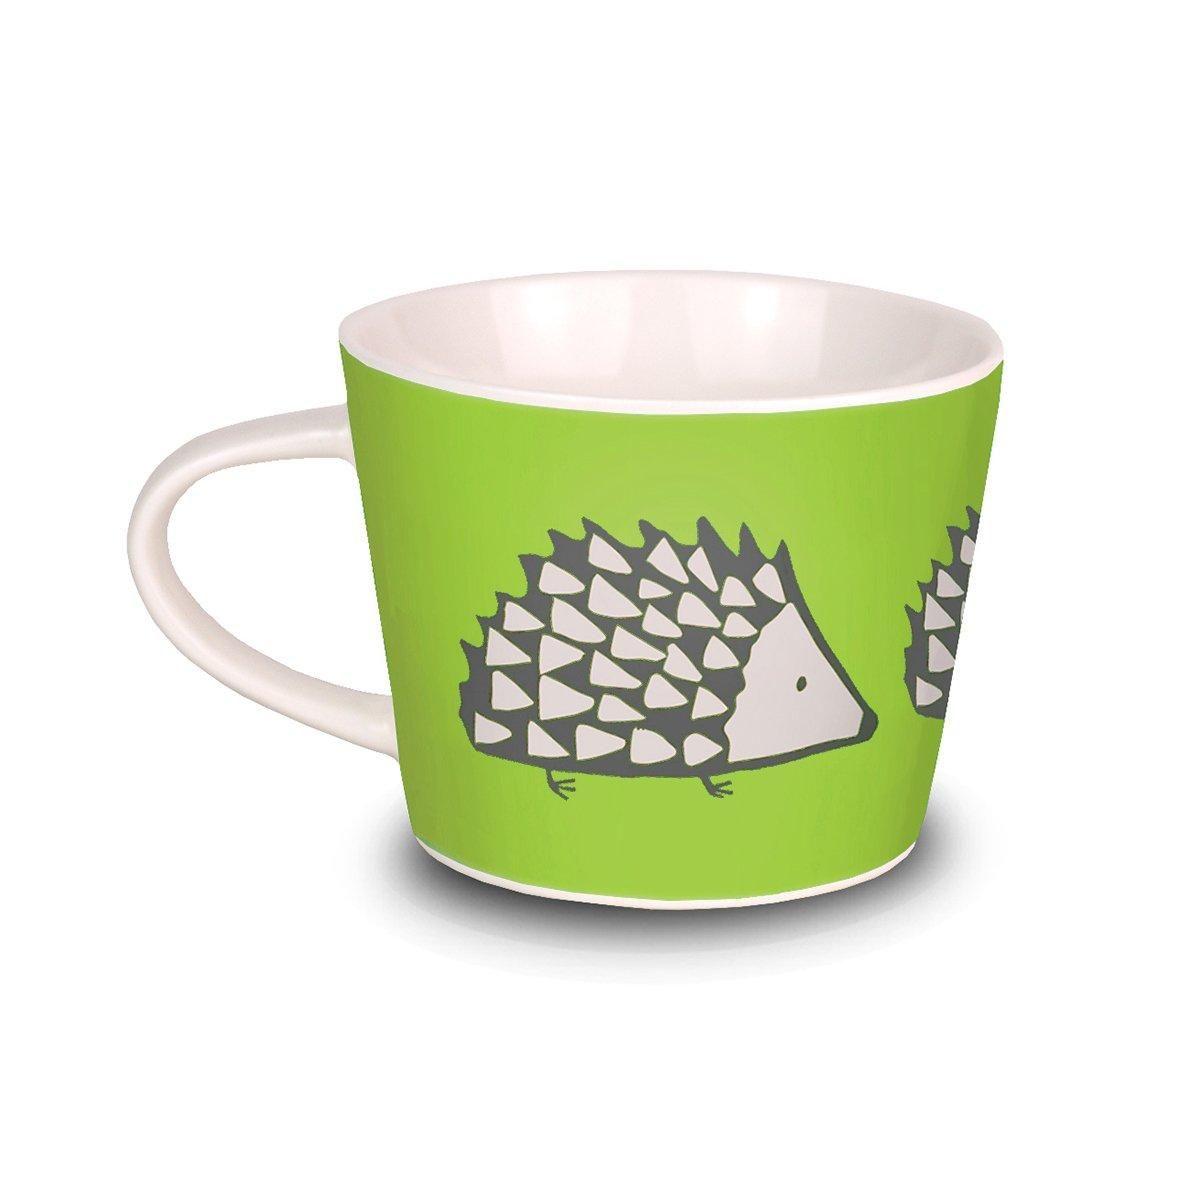  Mugs And Cups SC-0127 